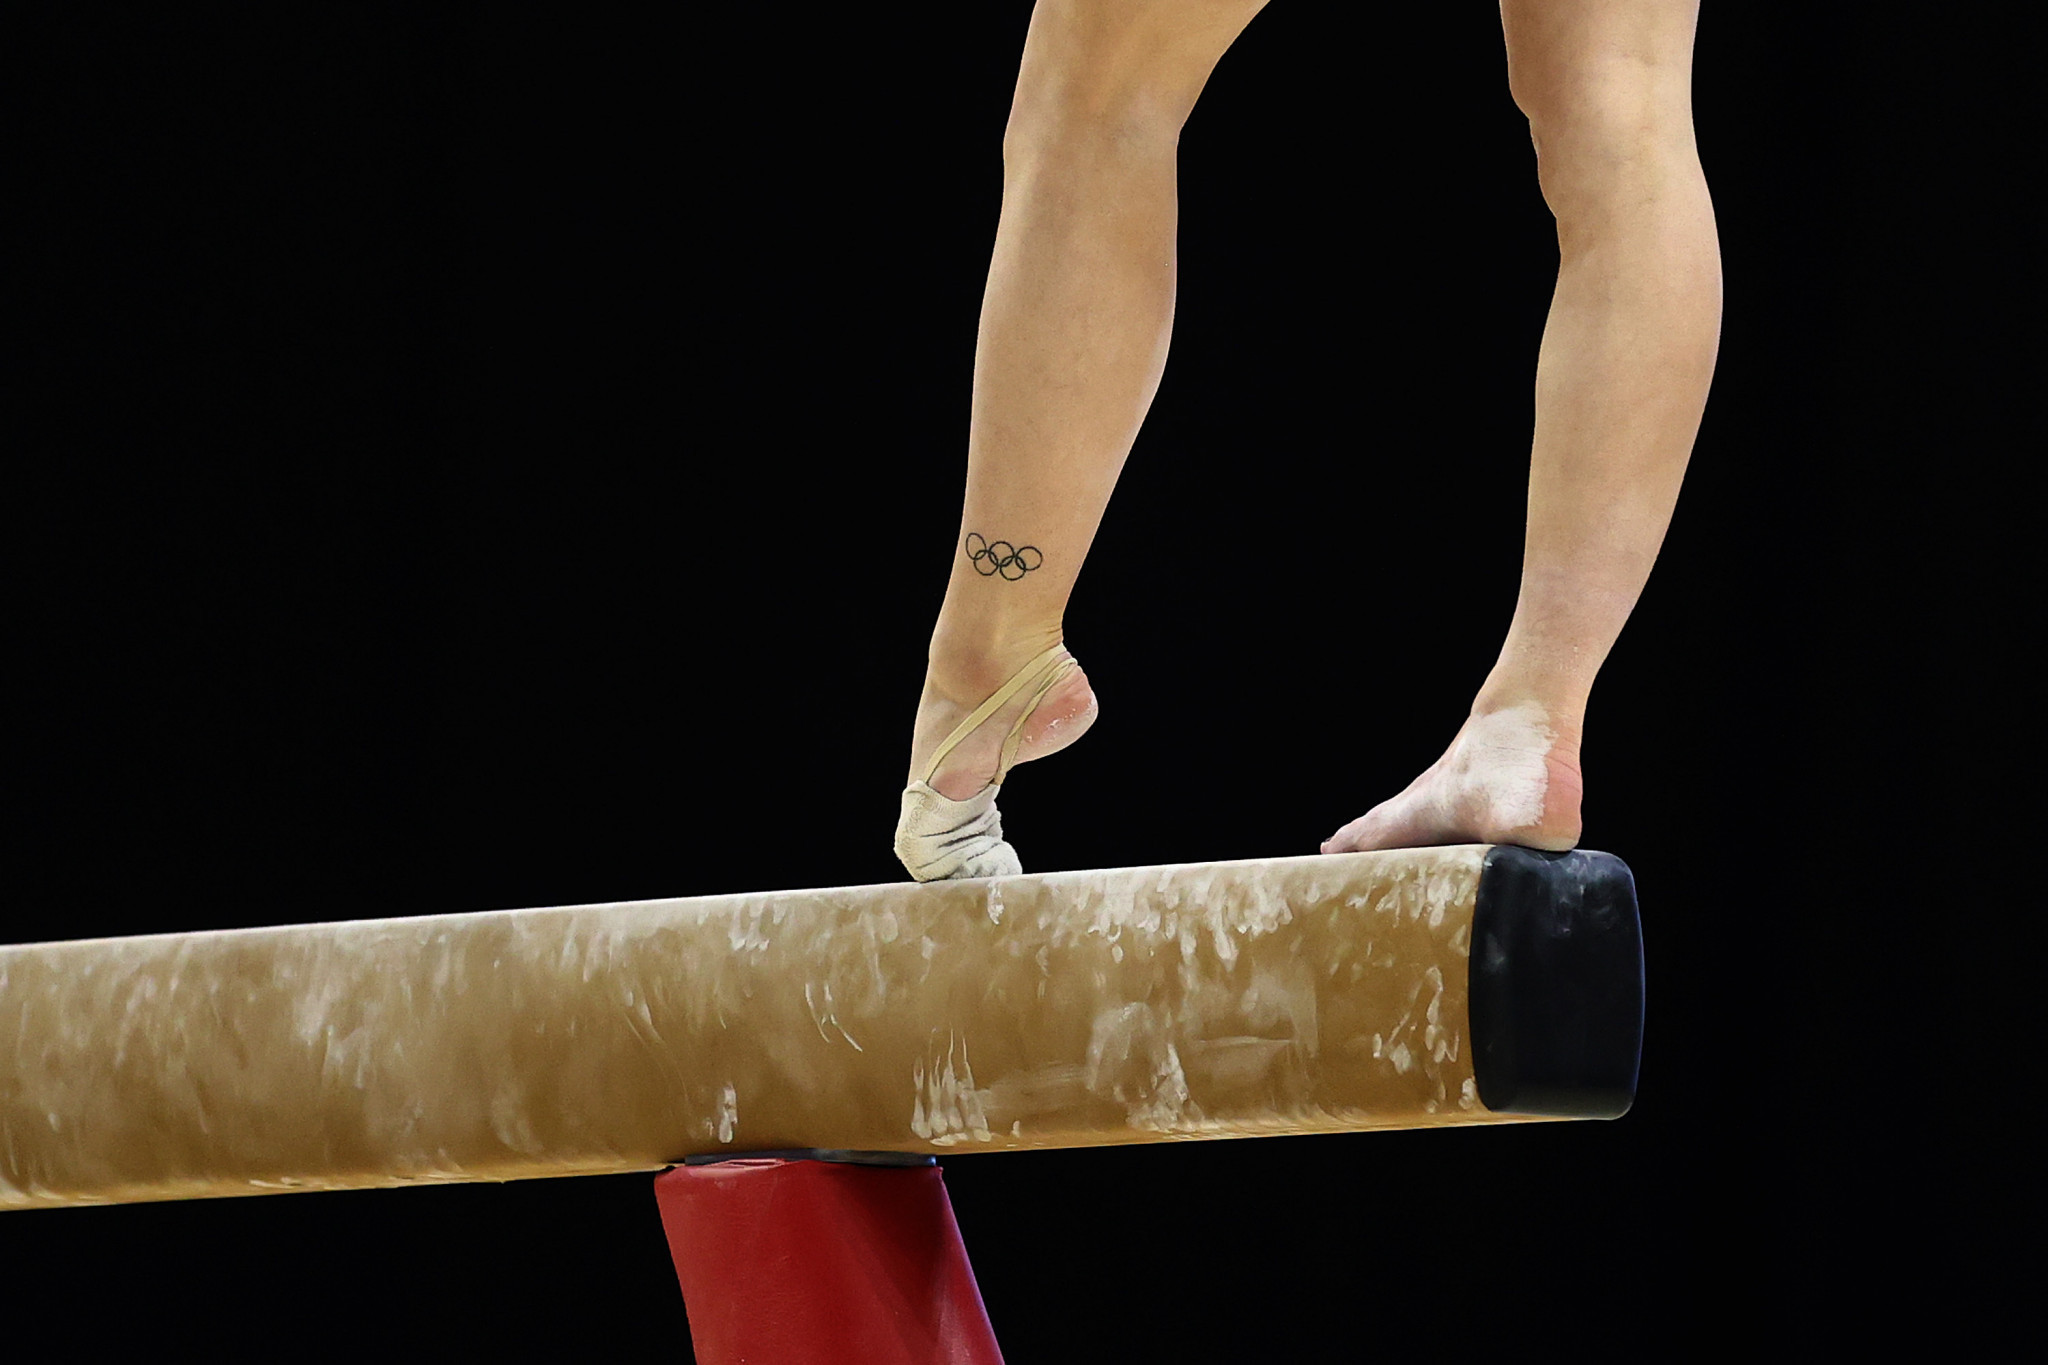 USA Gymnastics is undergoing a cultural transformation in a bid to move forward after the Larry Nassar sexual abuse scandal ©Getty Images